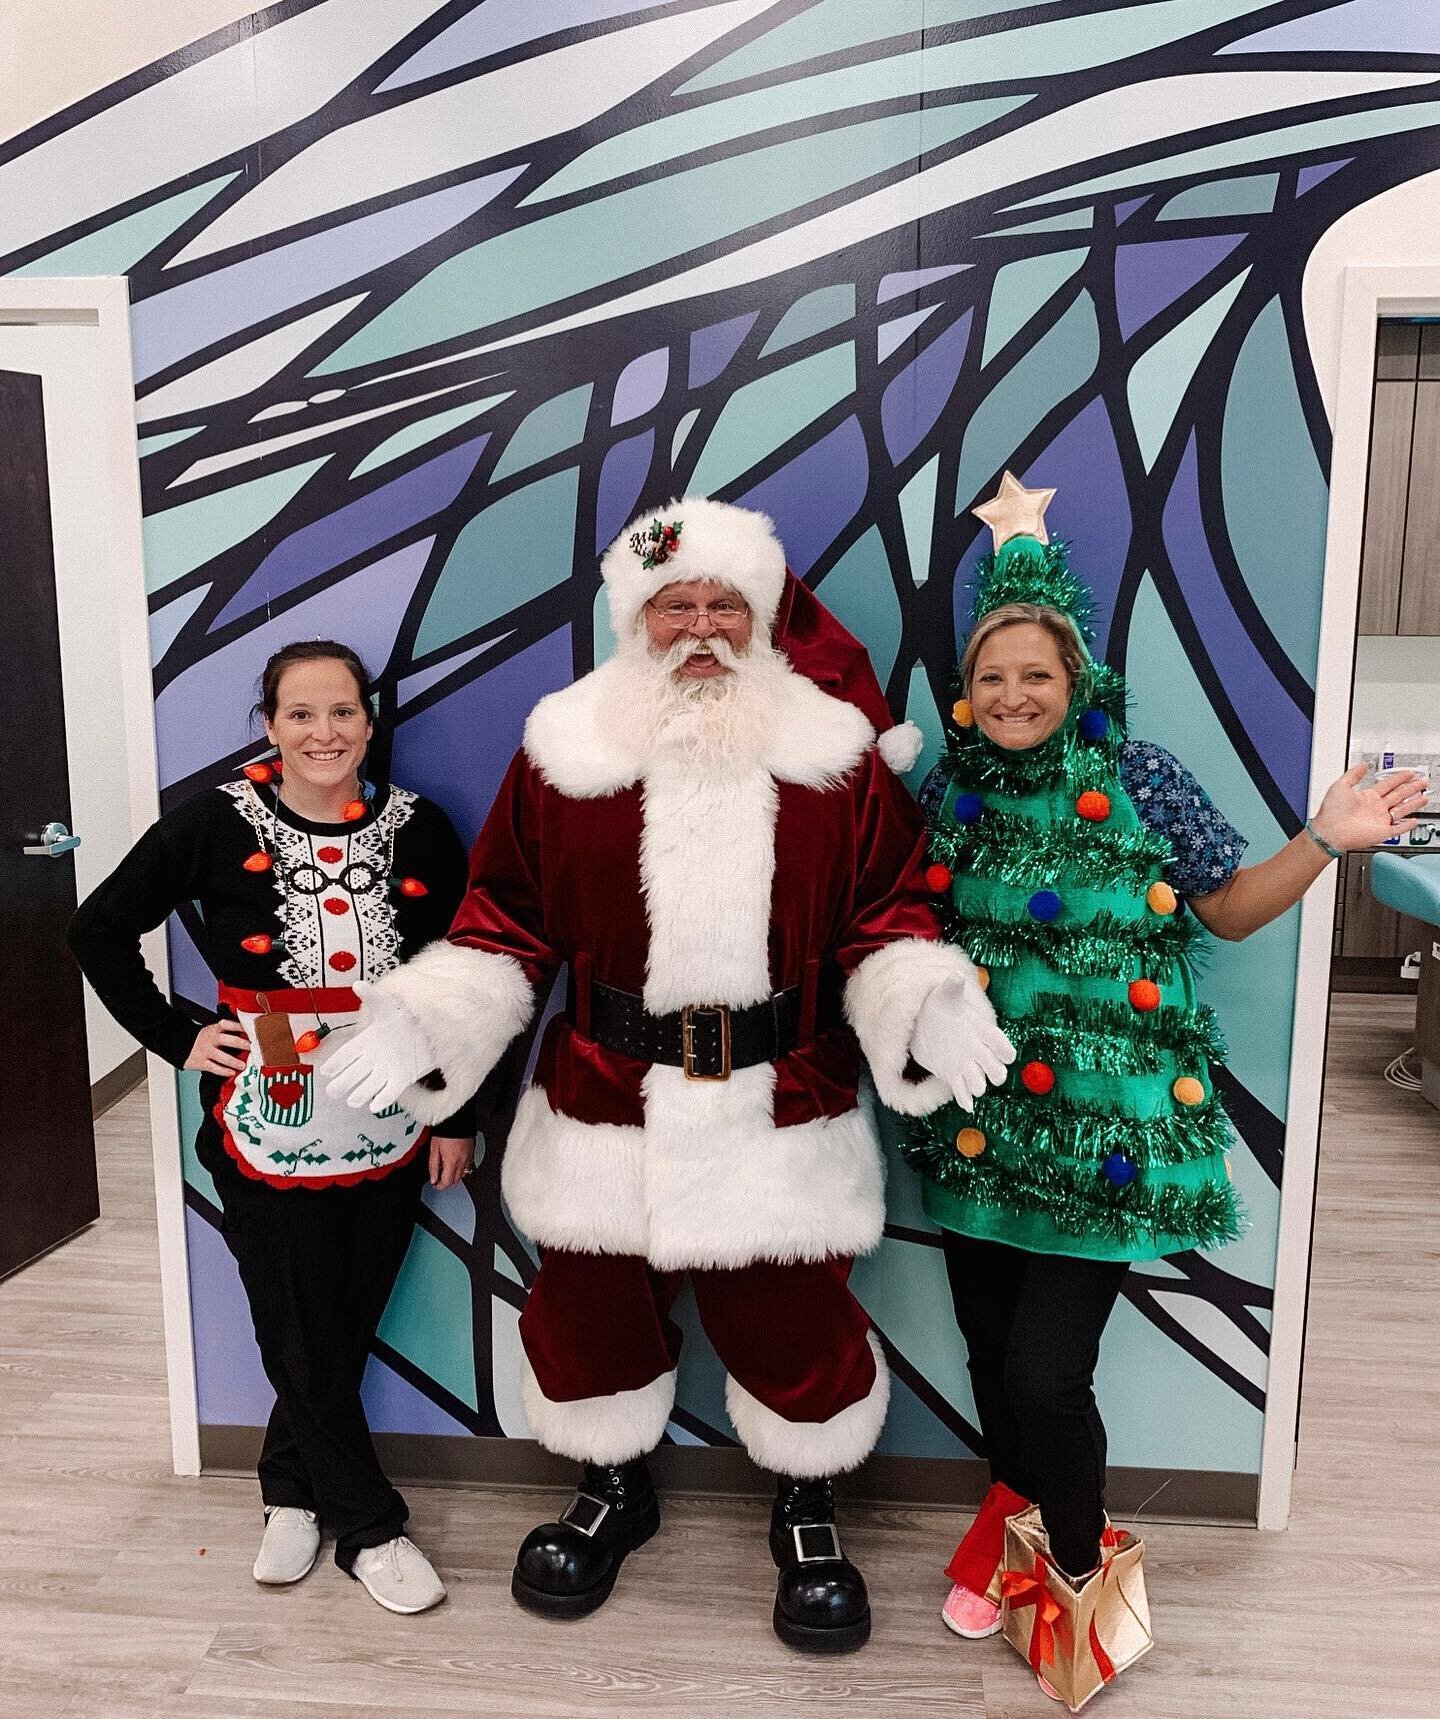 Drs. Jenn &amp; Beth say Santa is all clear for his big day! 🎄

Have you made your appointment?
𝐂𝐚𝐥𝐥 𝐓𝐨𝐝𝐚𝐲! 𝟒𝟐𝟑.𝟖𝟒𝟐.𝟎𝟏𝟔𝟓